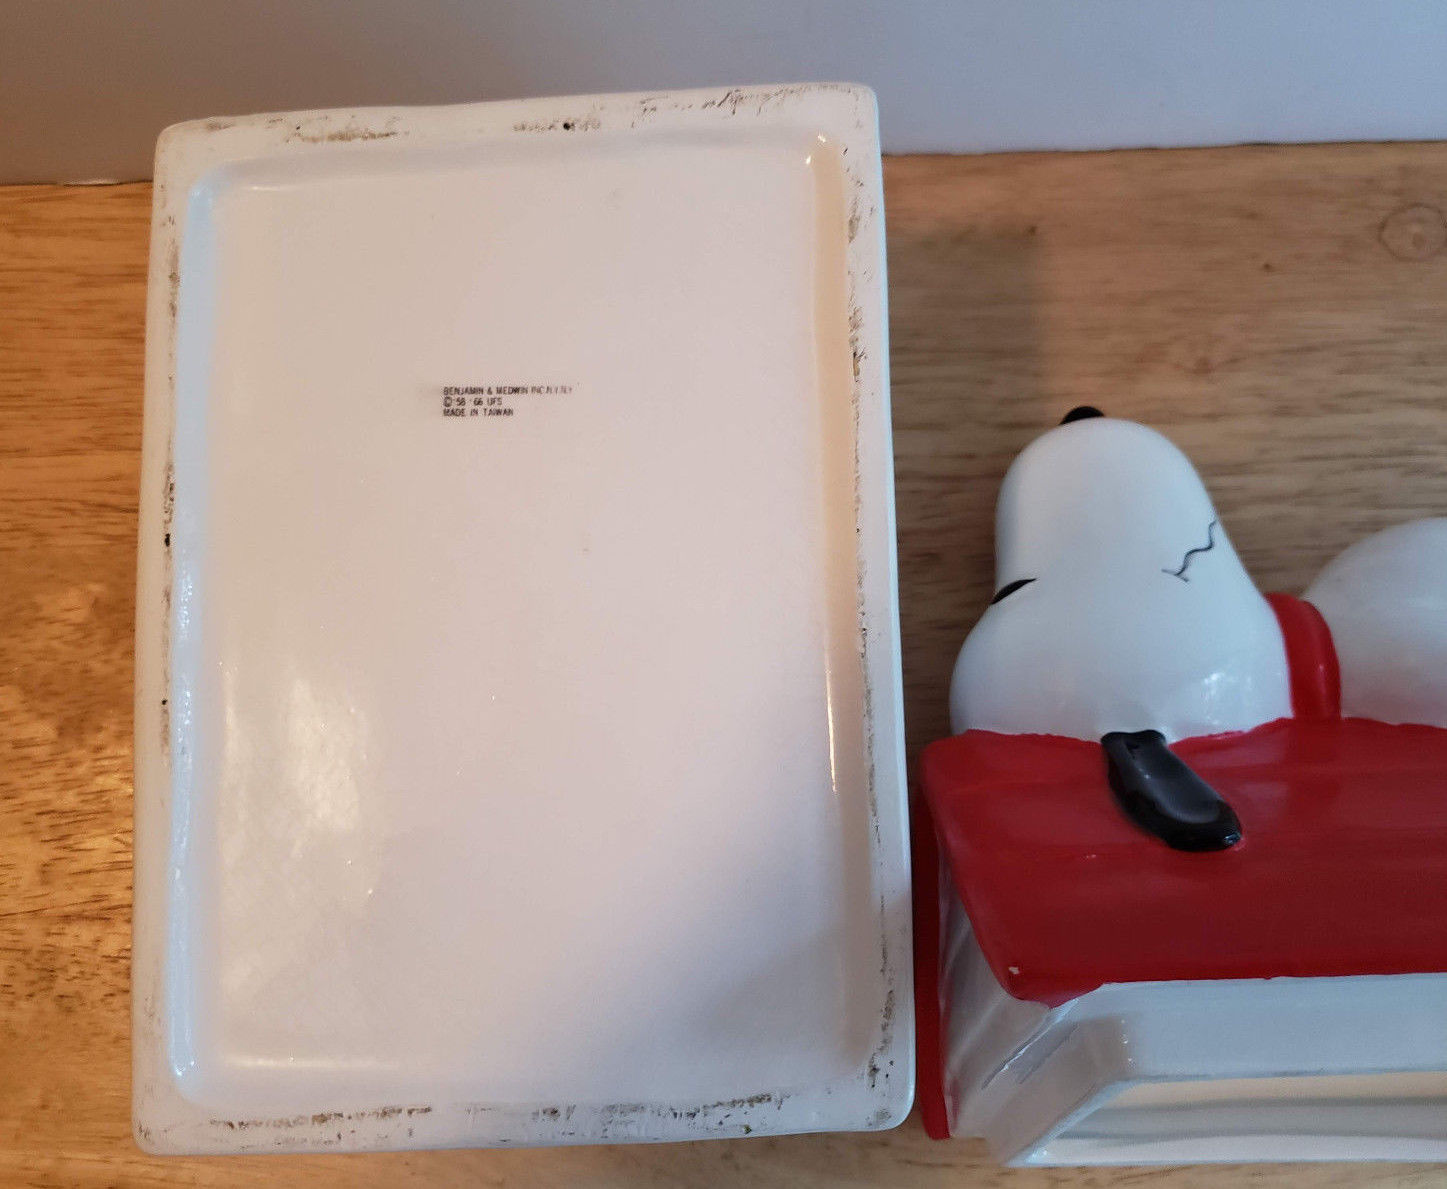 https://serstyle.com/wp-content/uploads/2018/09/snoopy-cookie-jar-vintage-red-roof-.jpg